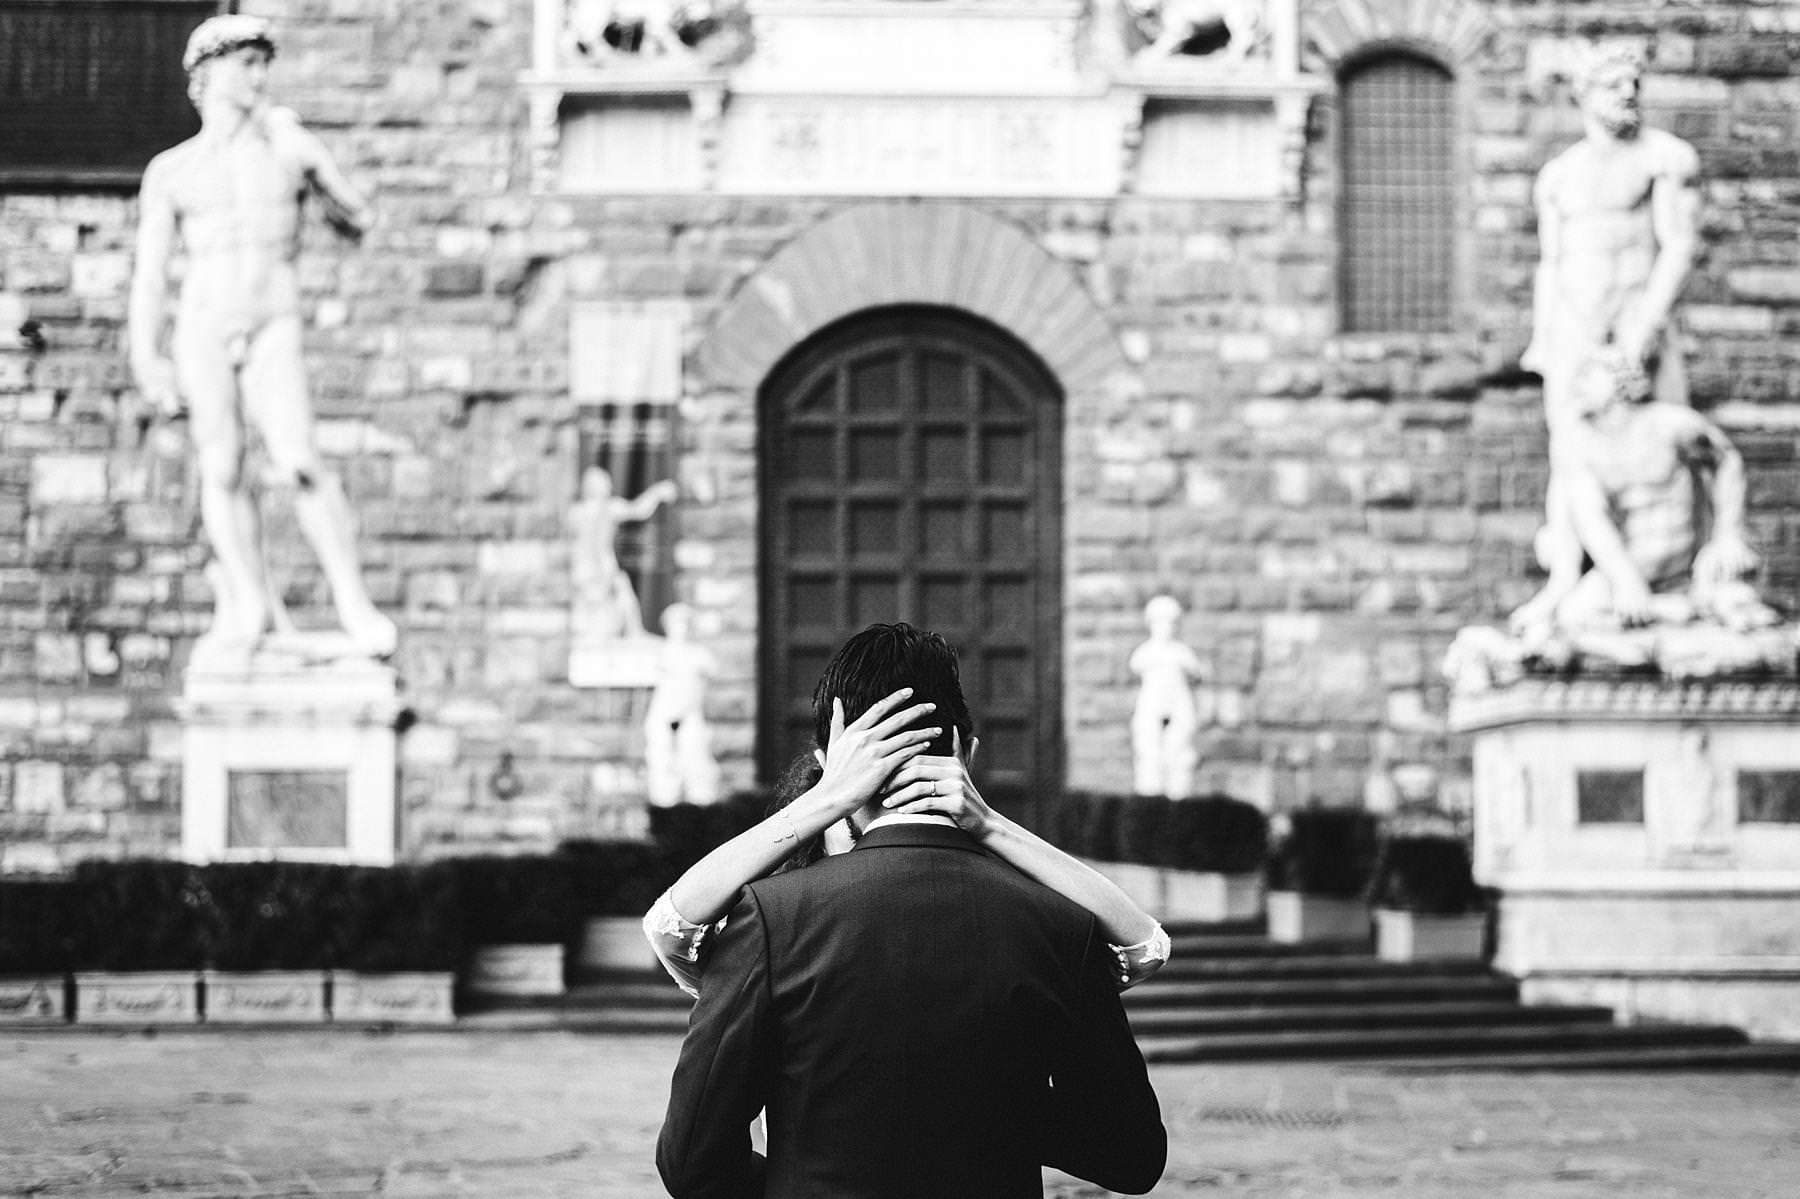 Couple sunrise photos during honeymoon in Florence. The session started in Piazza della Signoria, the beating heart of Florence, and it touched the Uffizi Gallery, Ponte Vecchio, Piazza S. Firenze, Palazzo Strozzi and Piazzale Michelangelo